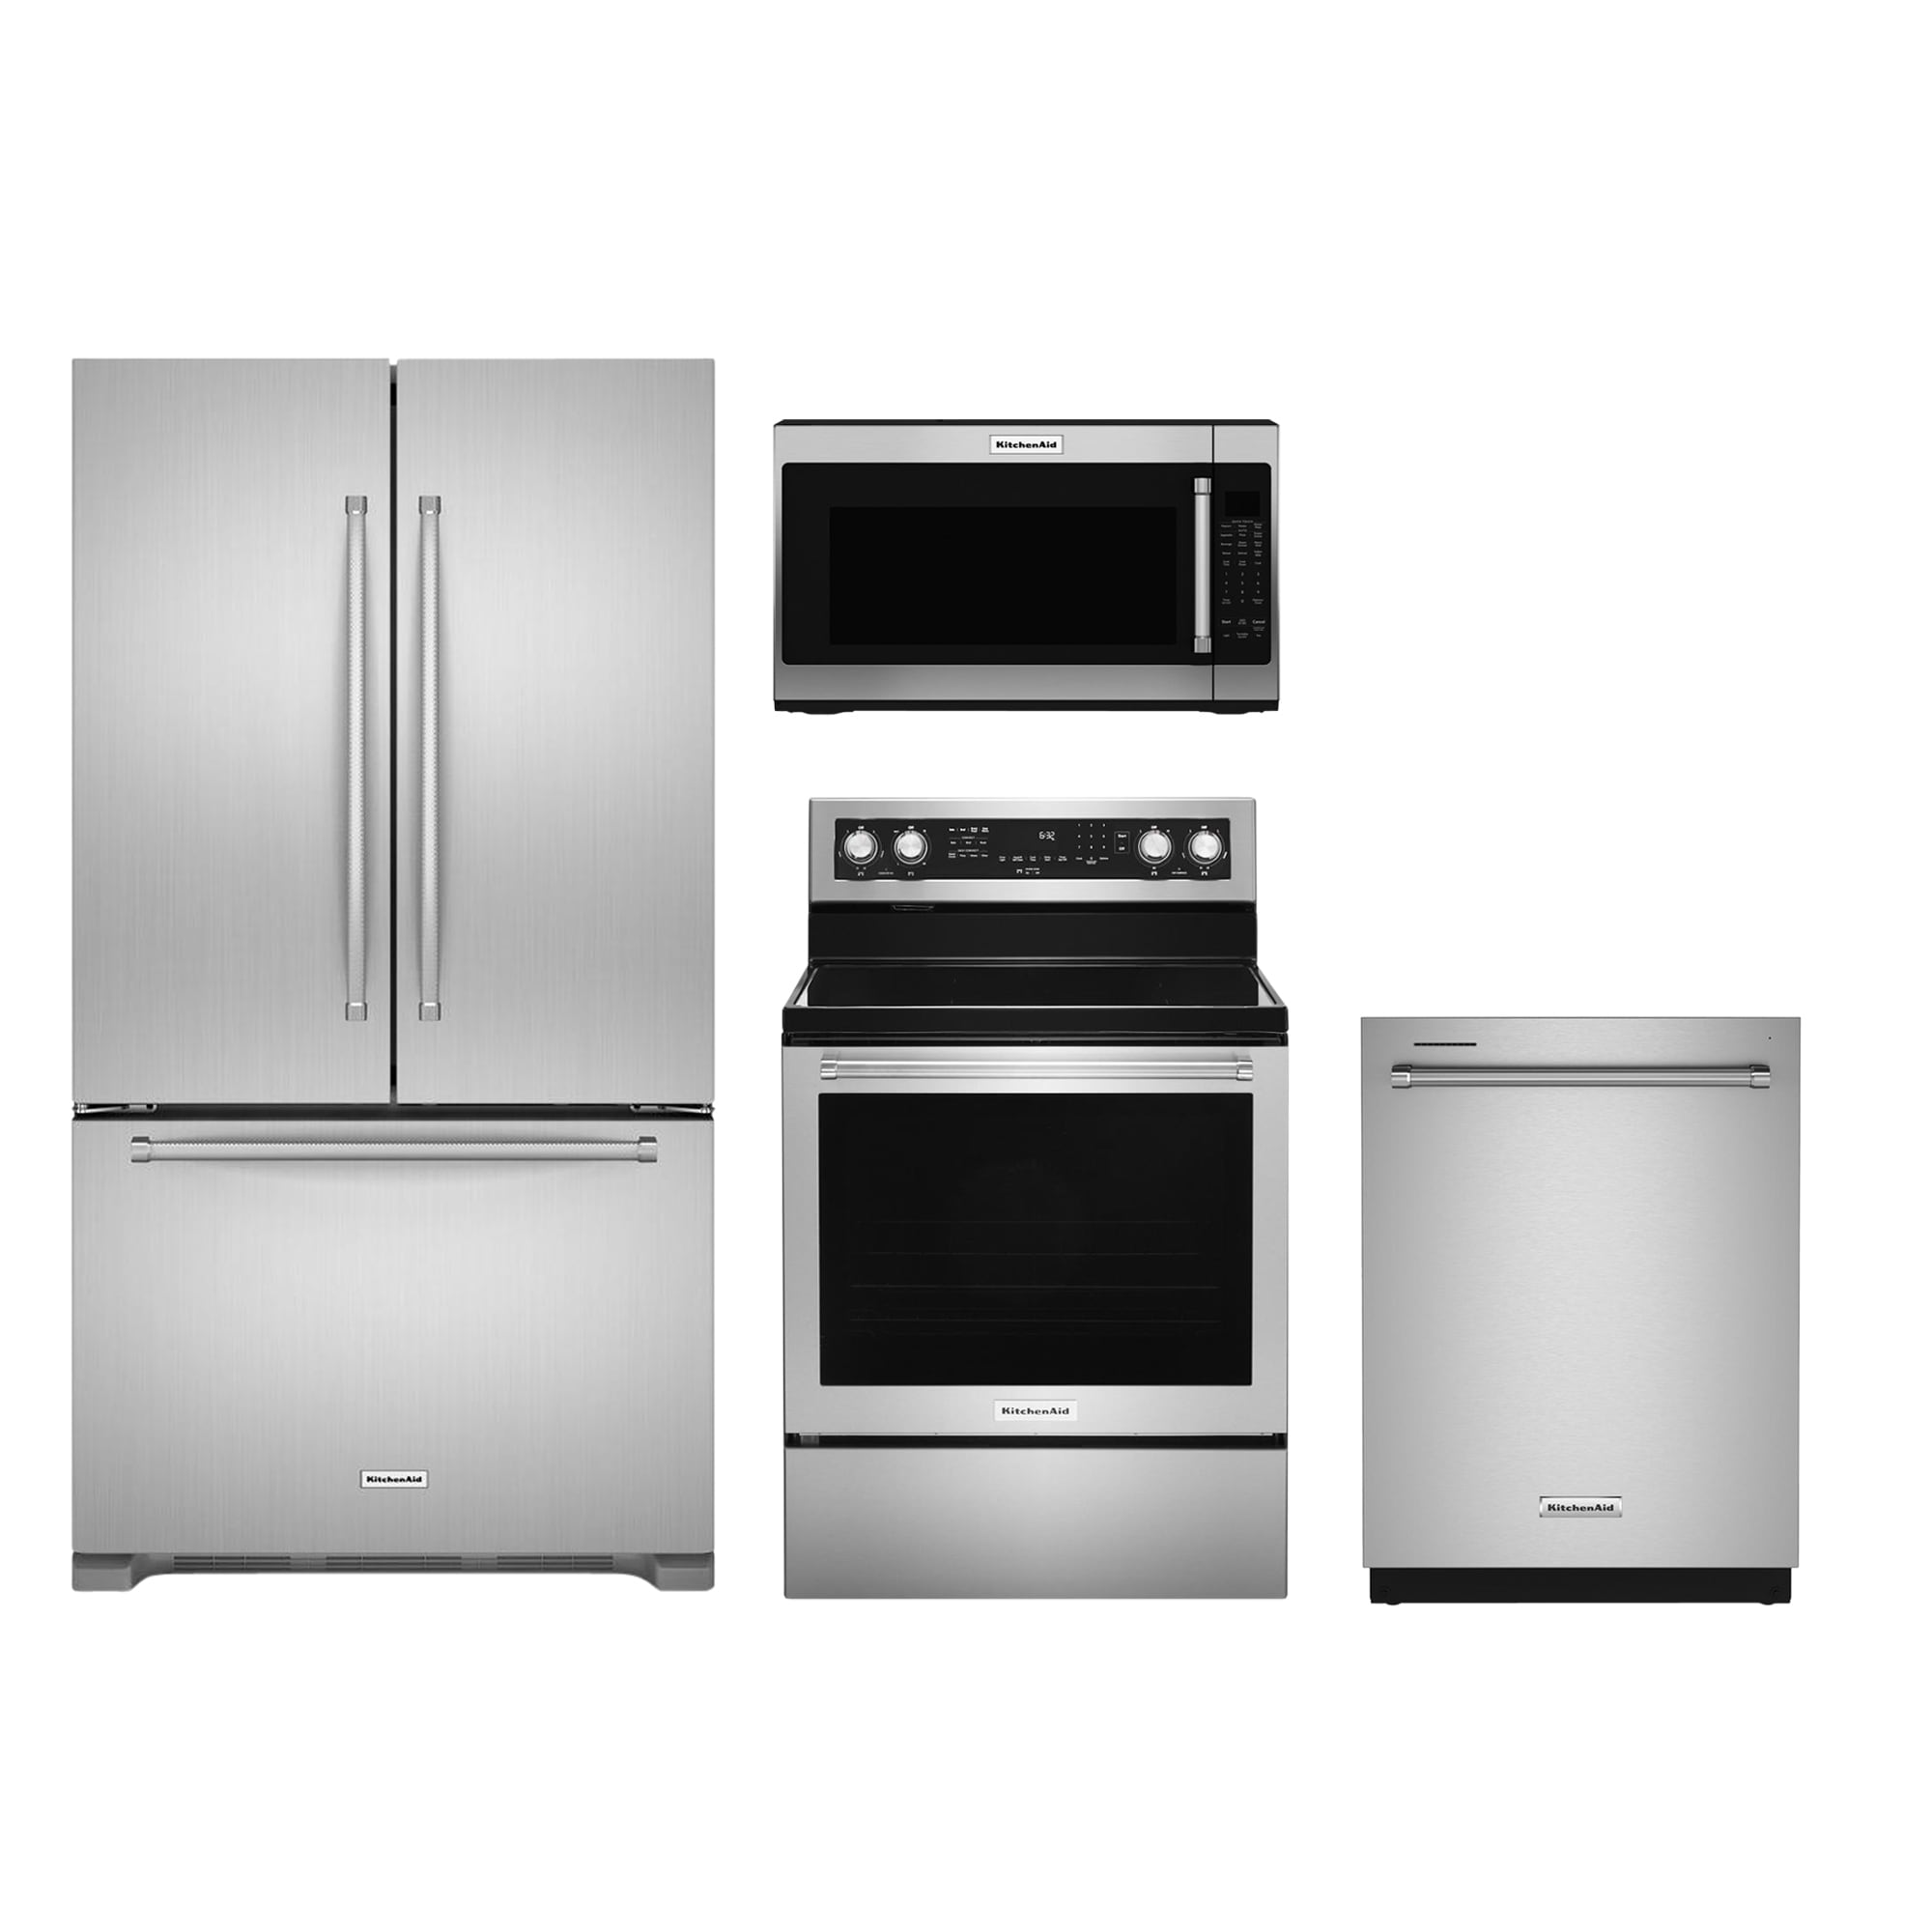 Whirlpool French Door & Electric Range Suite in Fingerprint-Resistant Stainless at Lowes.com